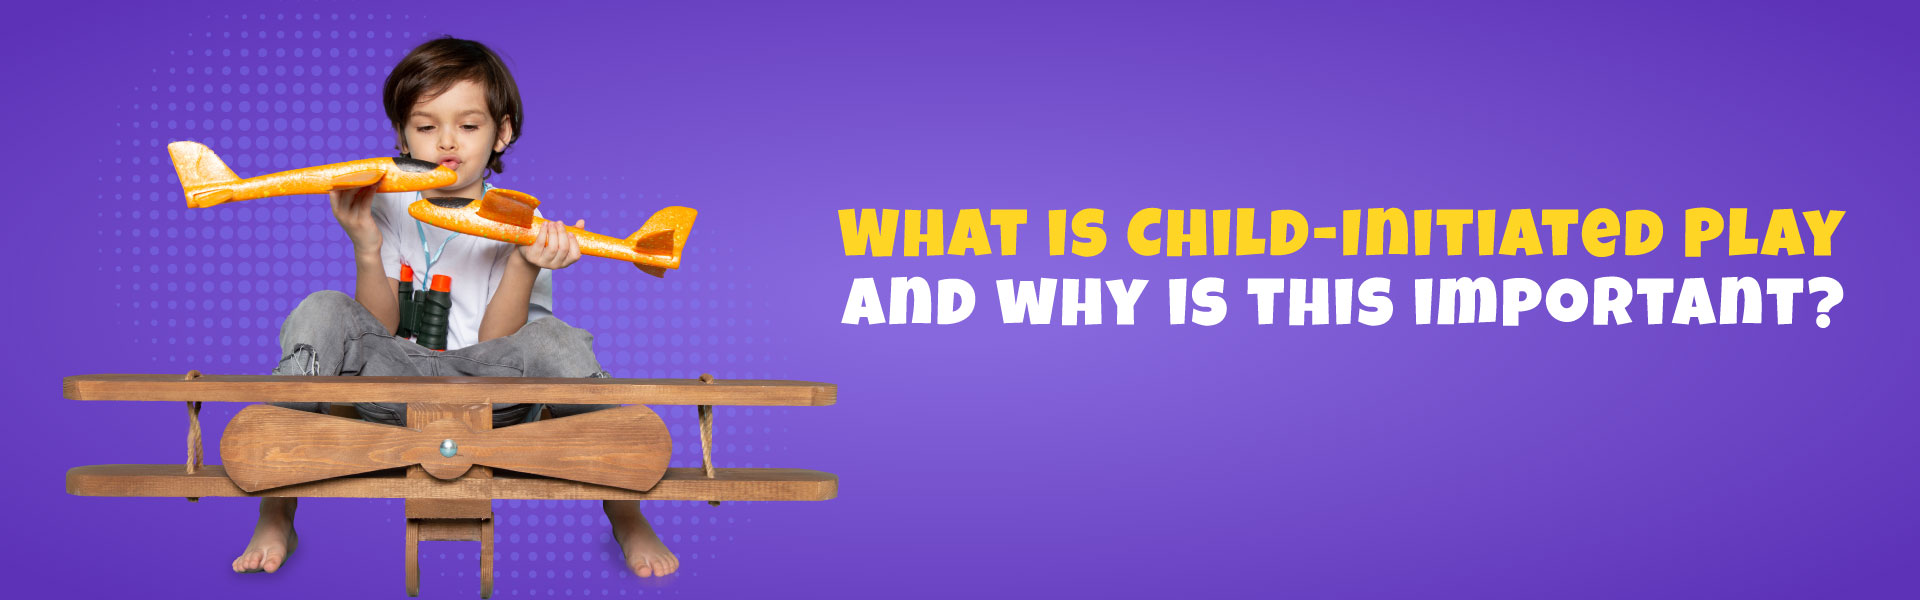 What is Child-Initiated Play and why is this important?